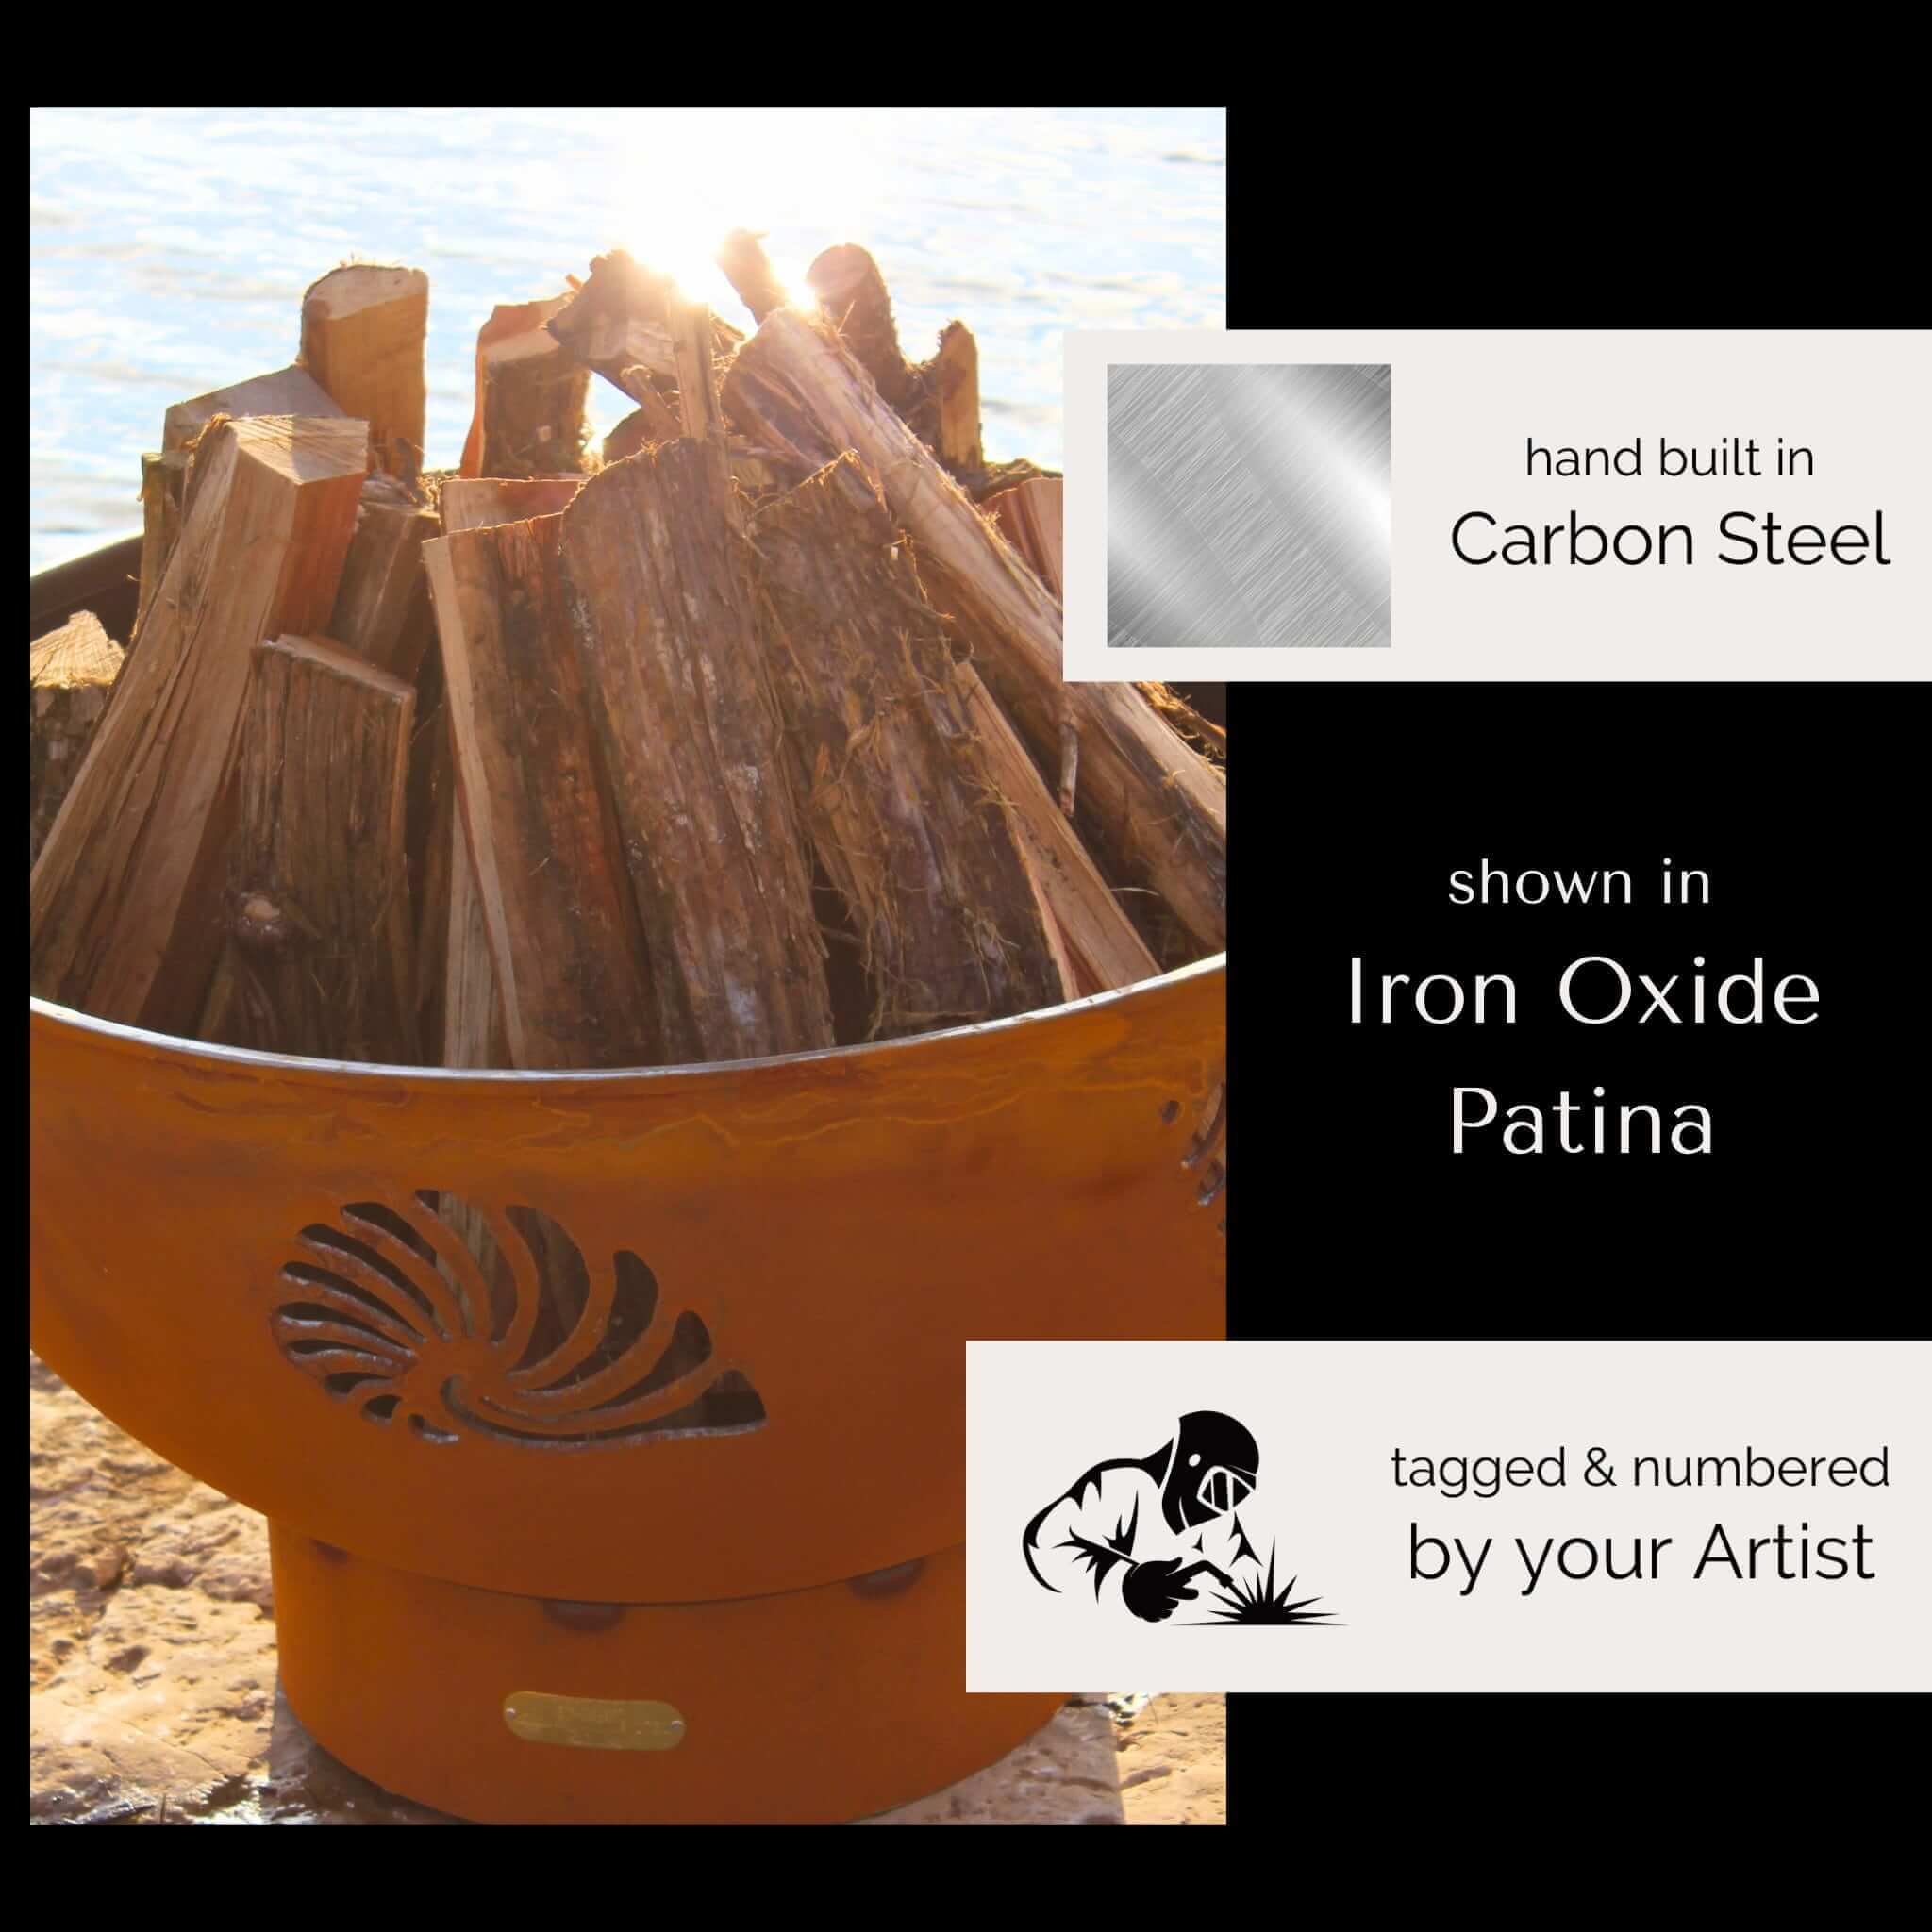 "Beachcomber" Wood Burning Fire Pit in Steel - Fire Pit Art